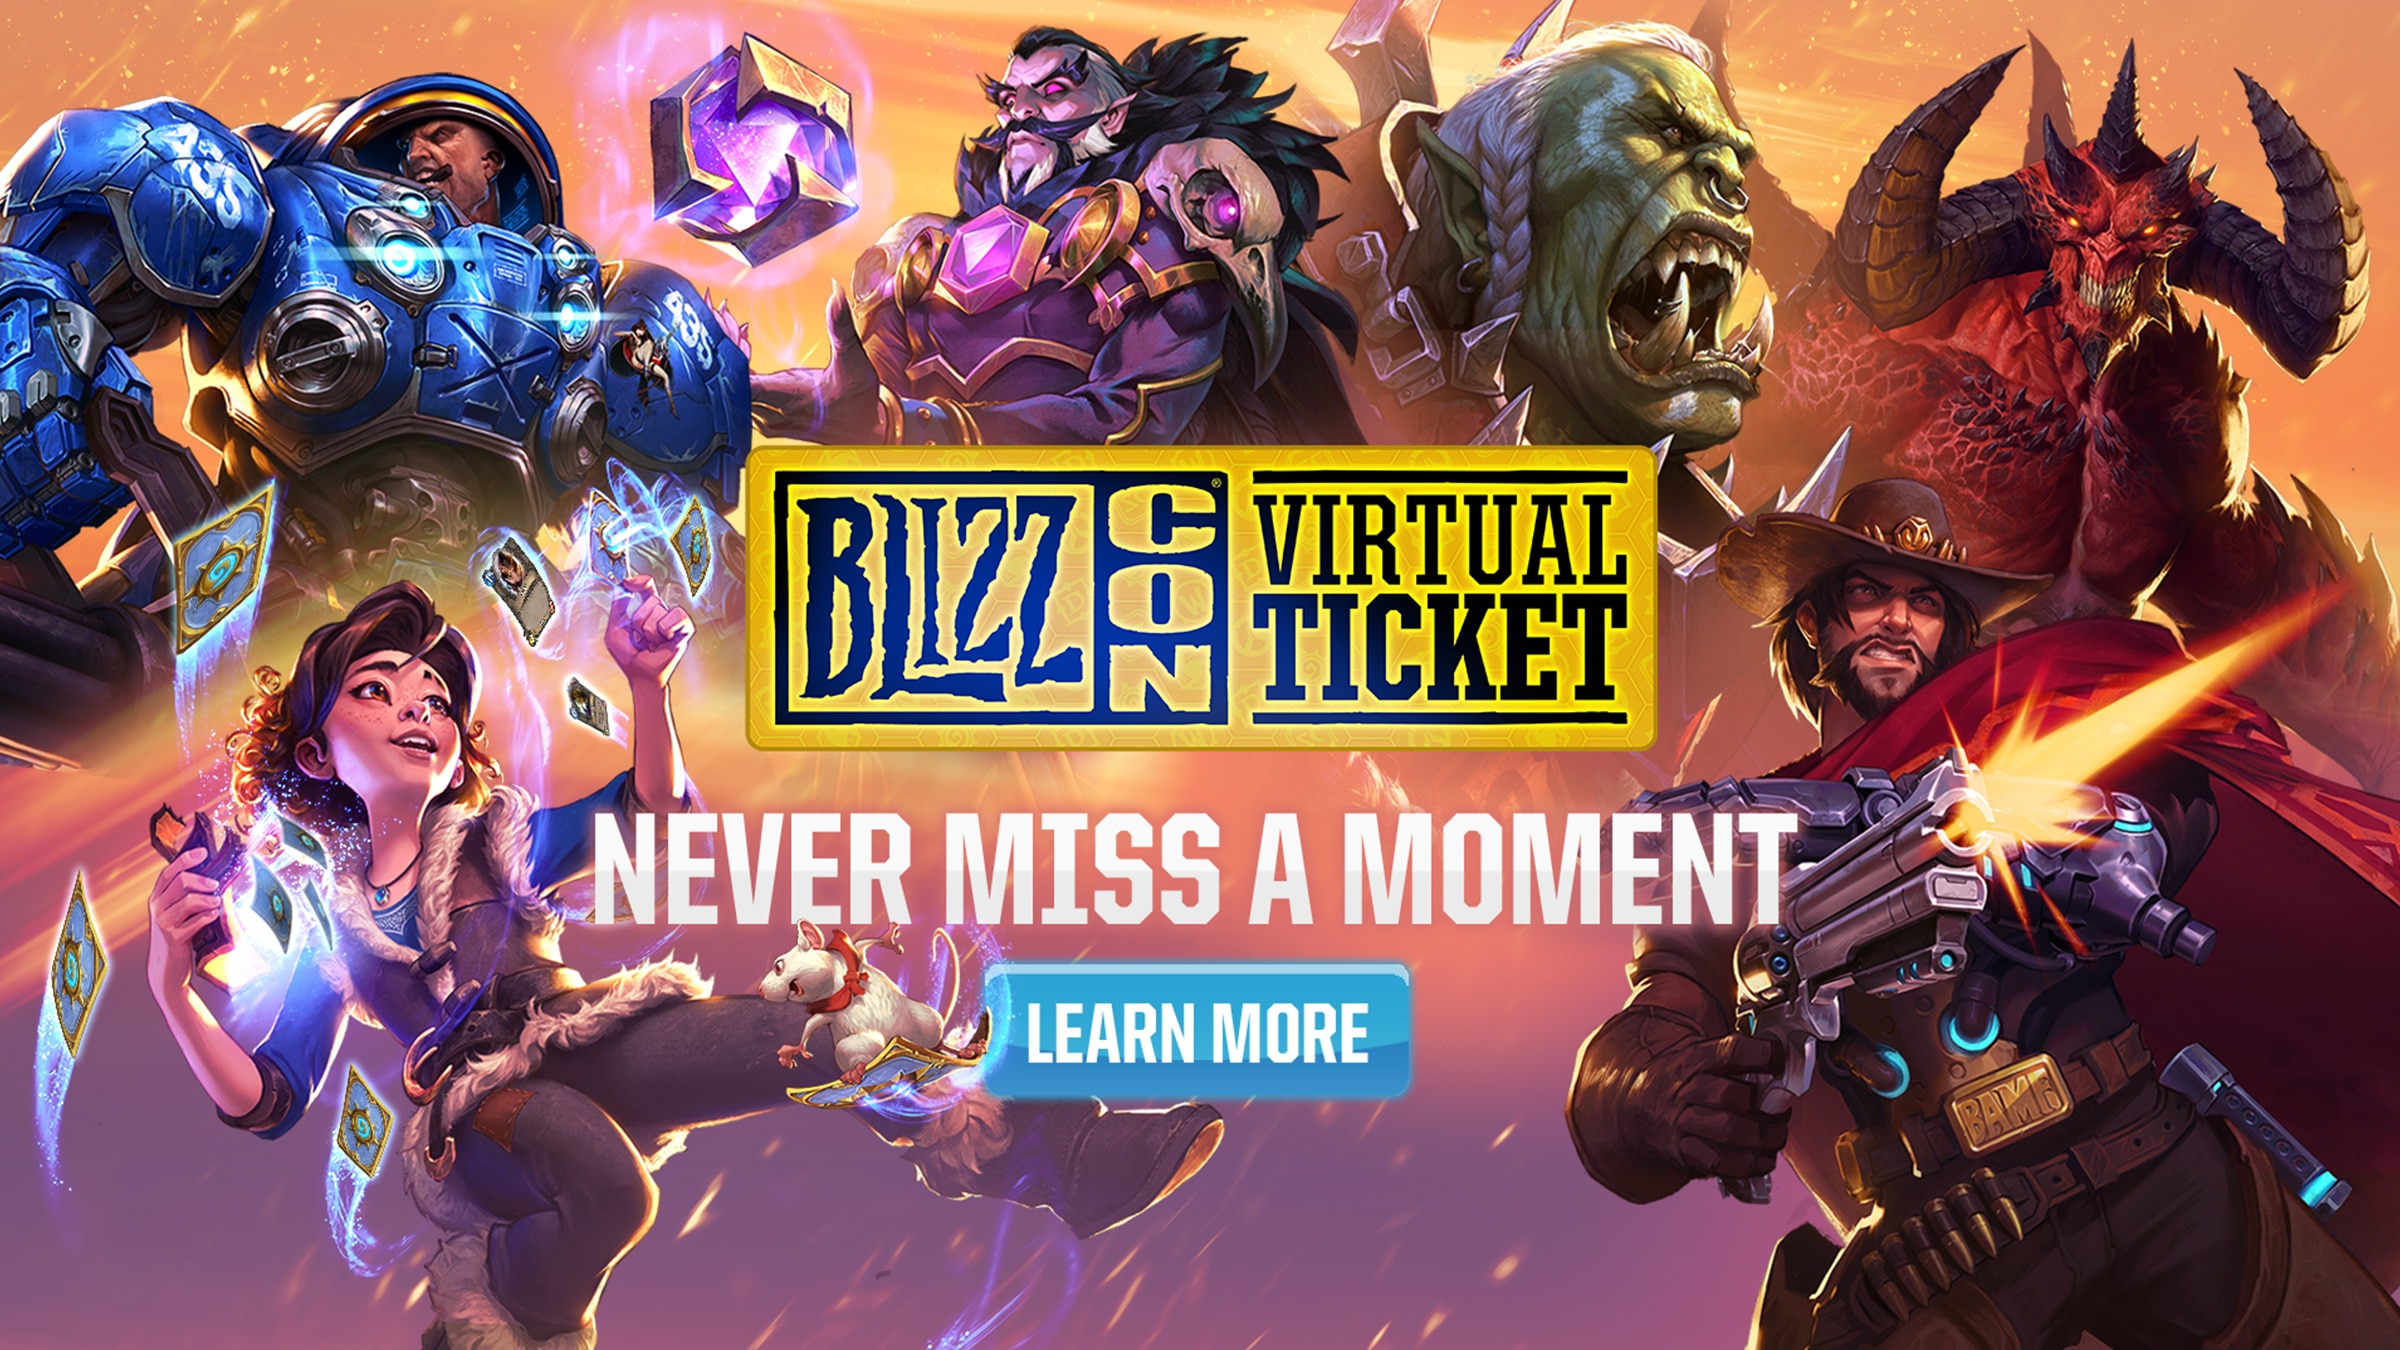 The BlizzCon® 2018 Celebration Kicks Off Early With the Virtual Ticket